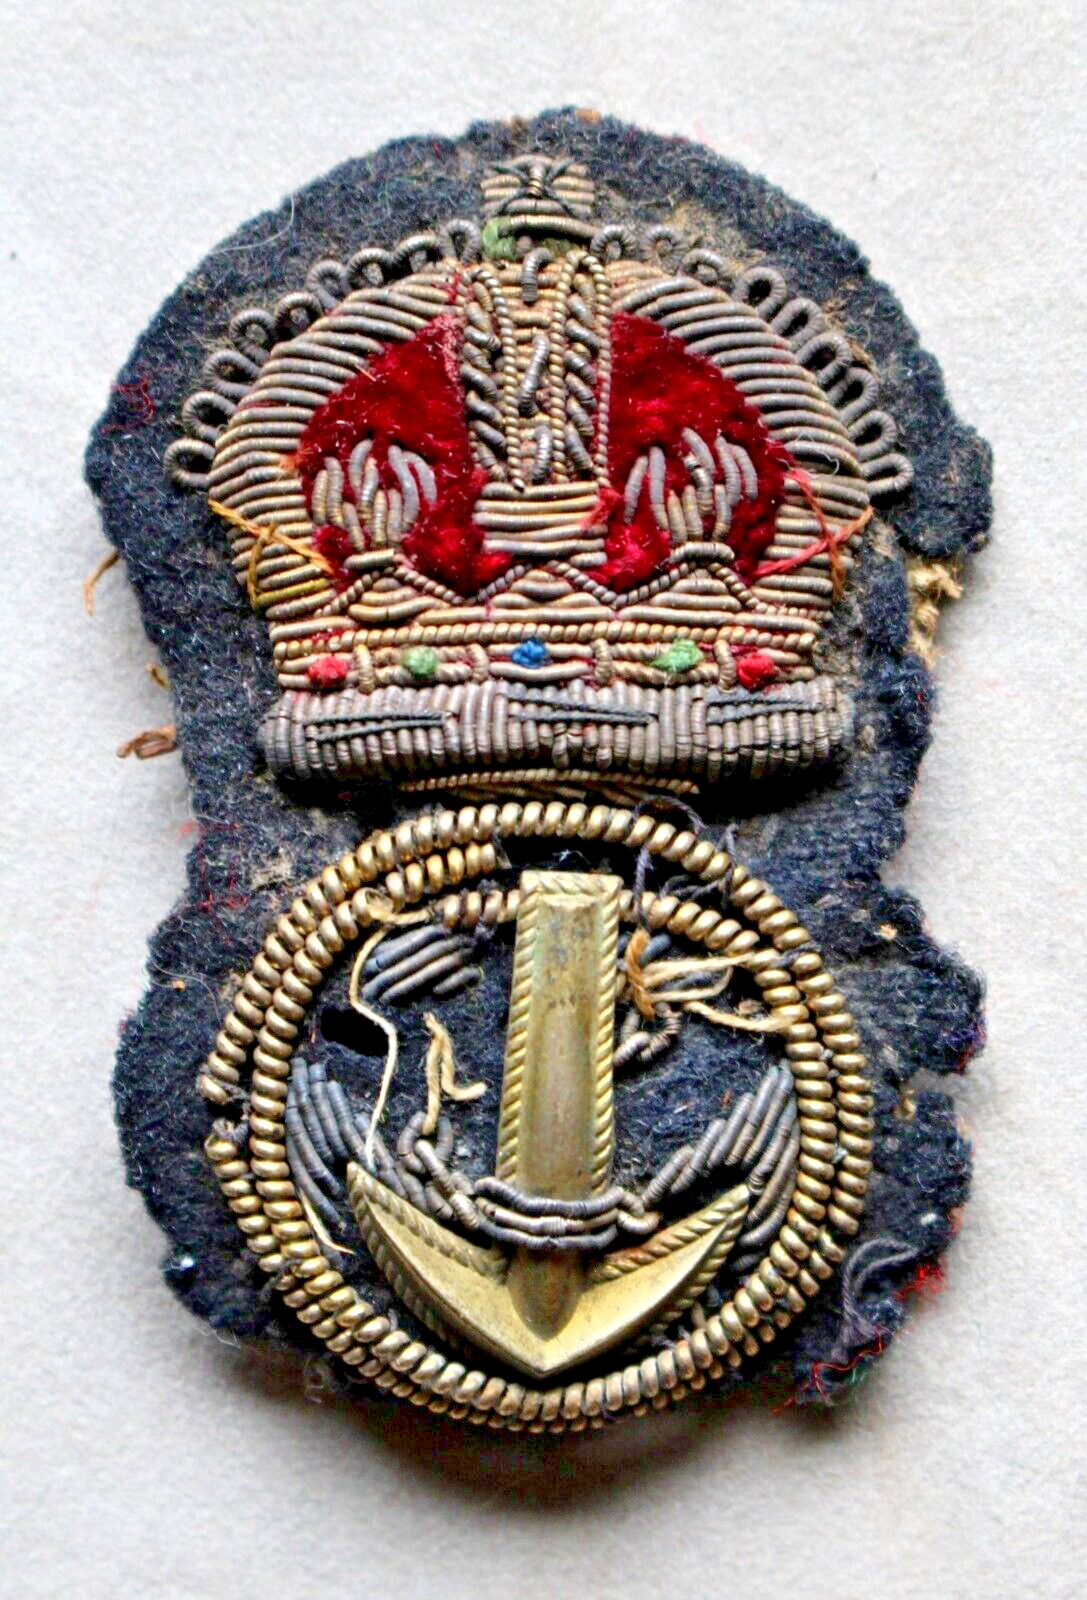 British WWII Royal Navy Petty Officer's Hat Insignia (Bullion Wire&Metal Anchor)